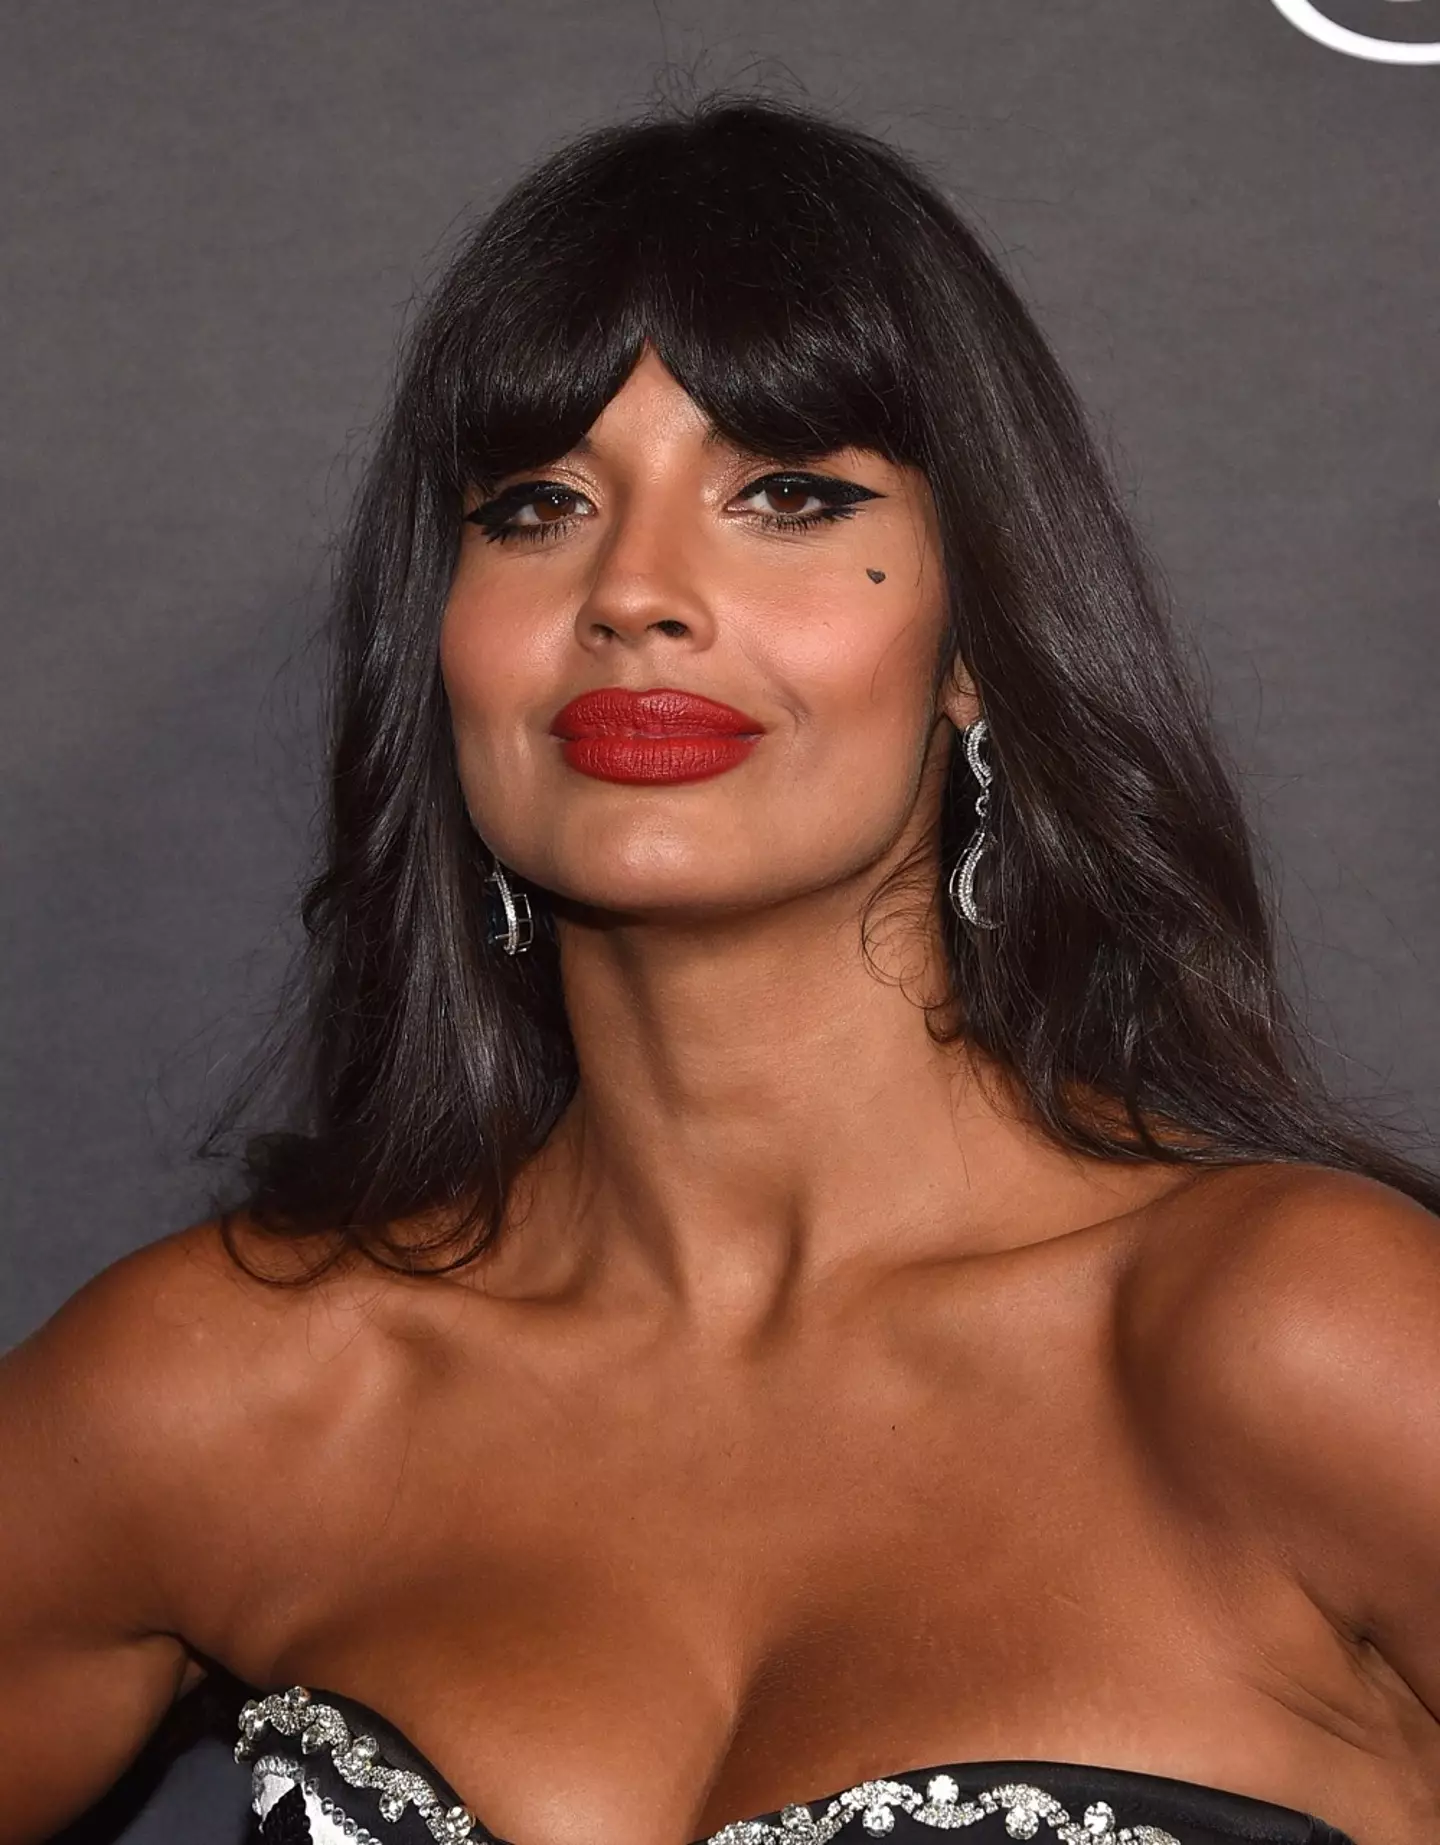 Jameela Jamil refused to audition for You on Netflix over the raunchy sex scenes.